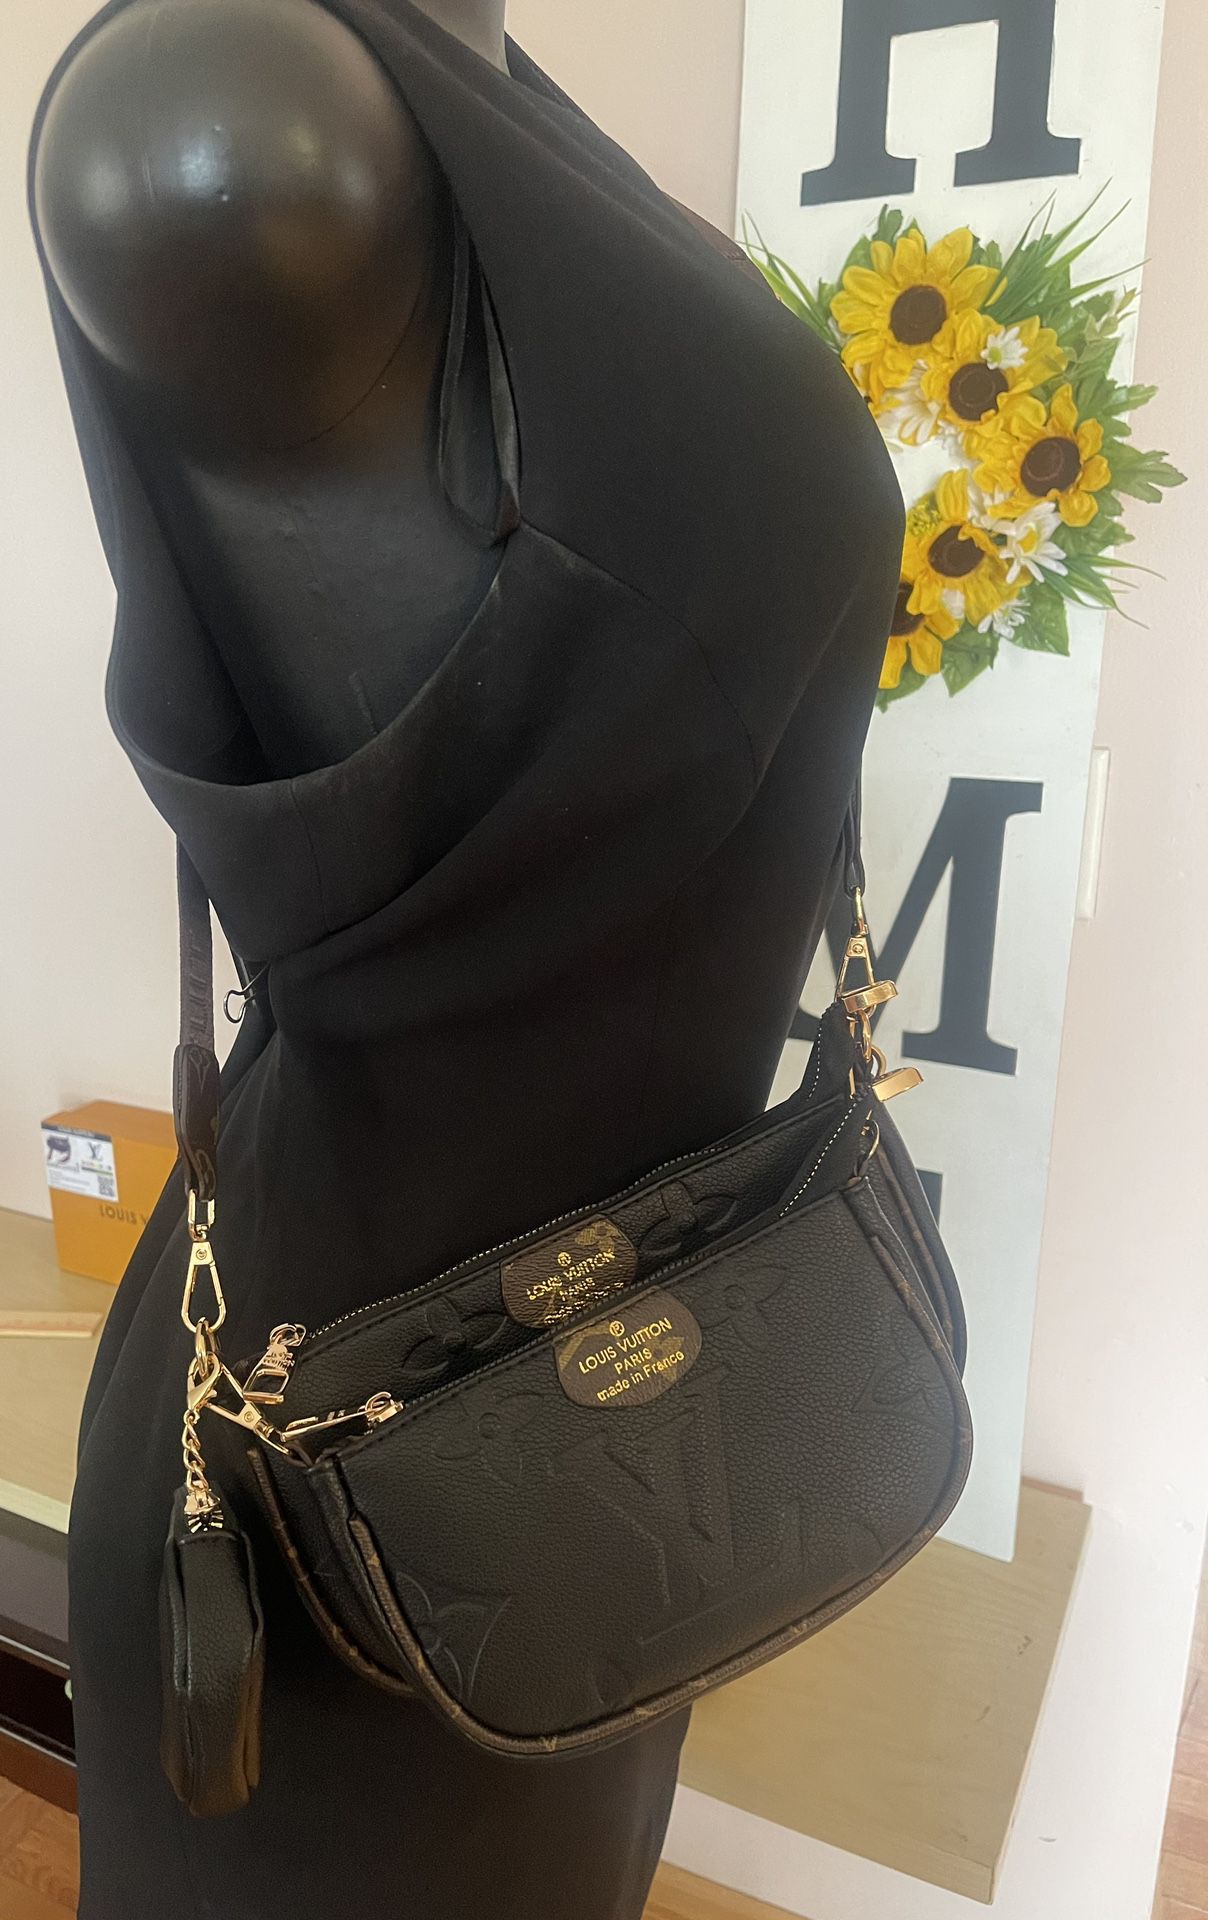 Beautiful Crossbody for Sale in Bolingbrook, IL - OfferUp